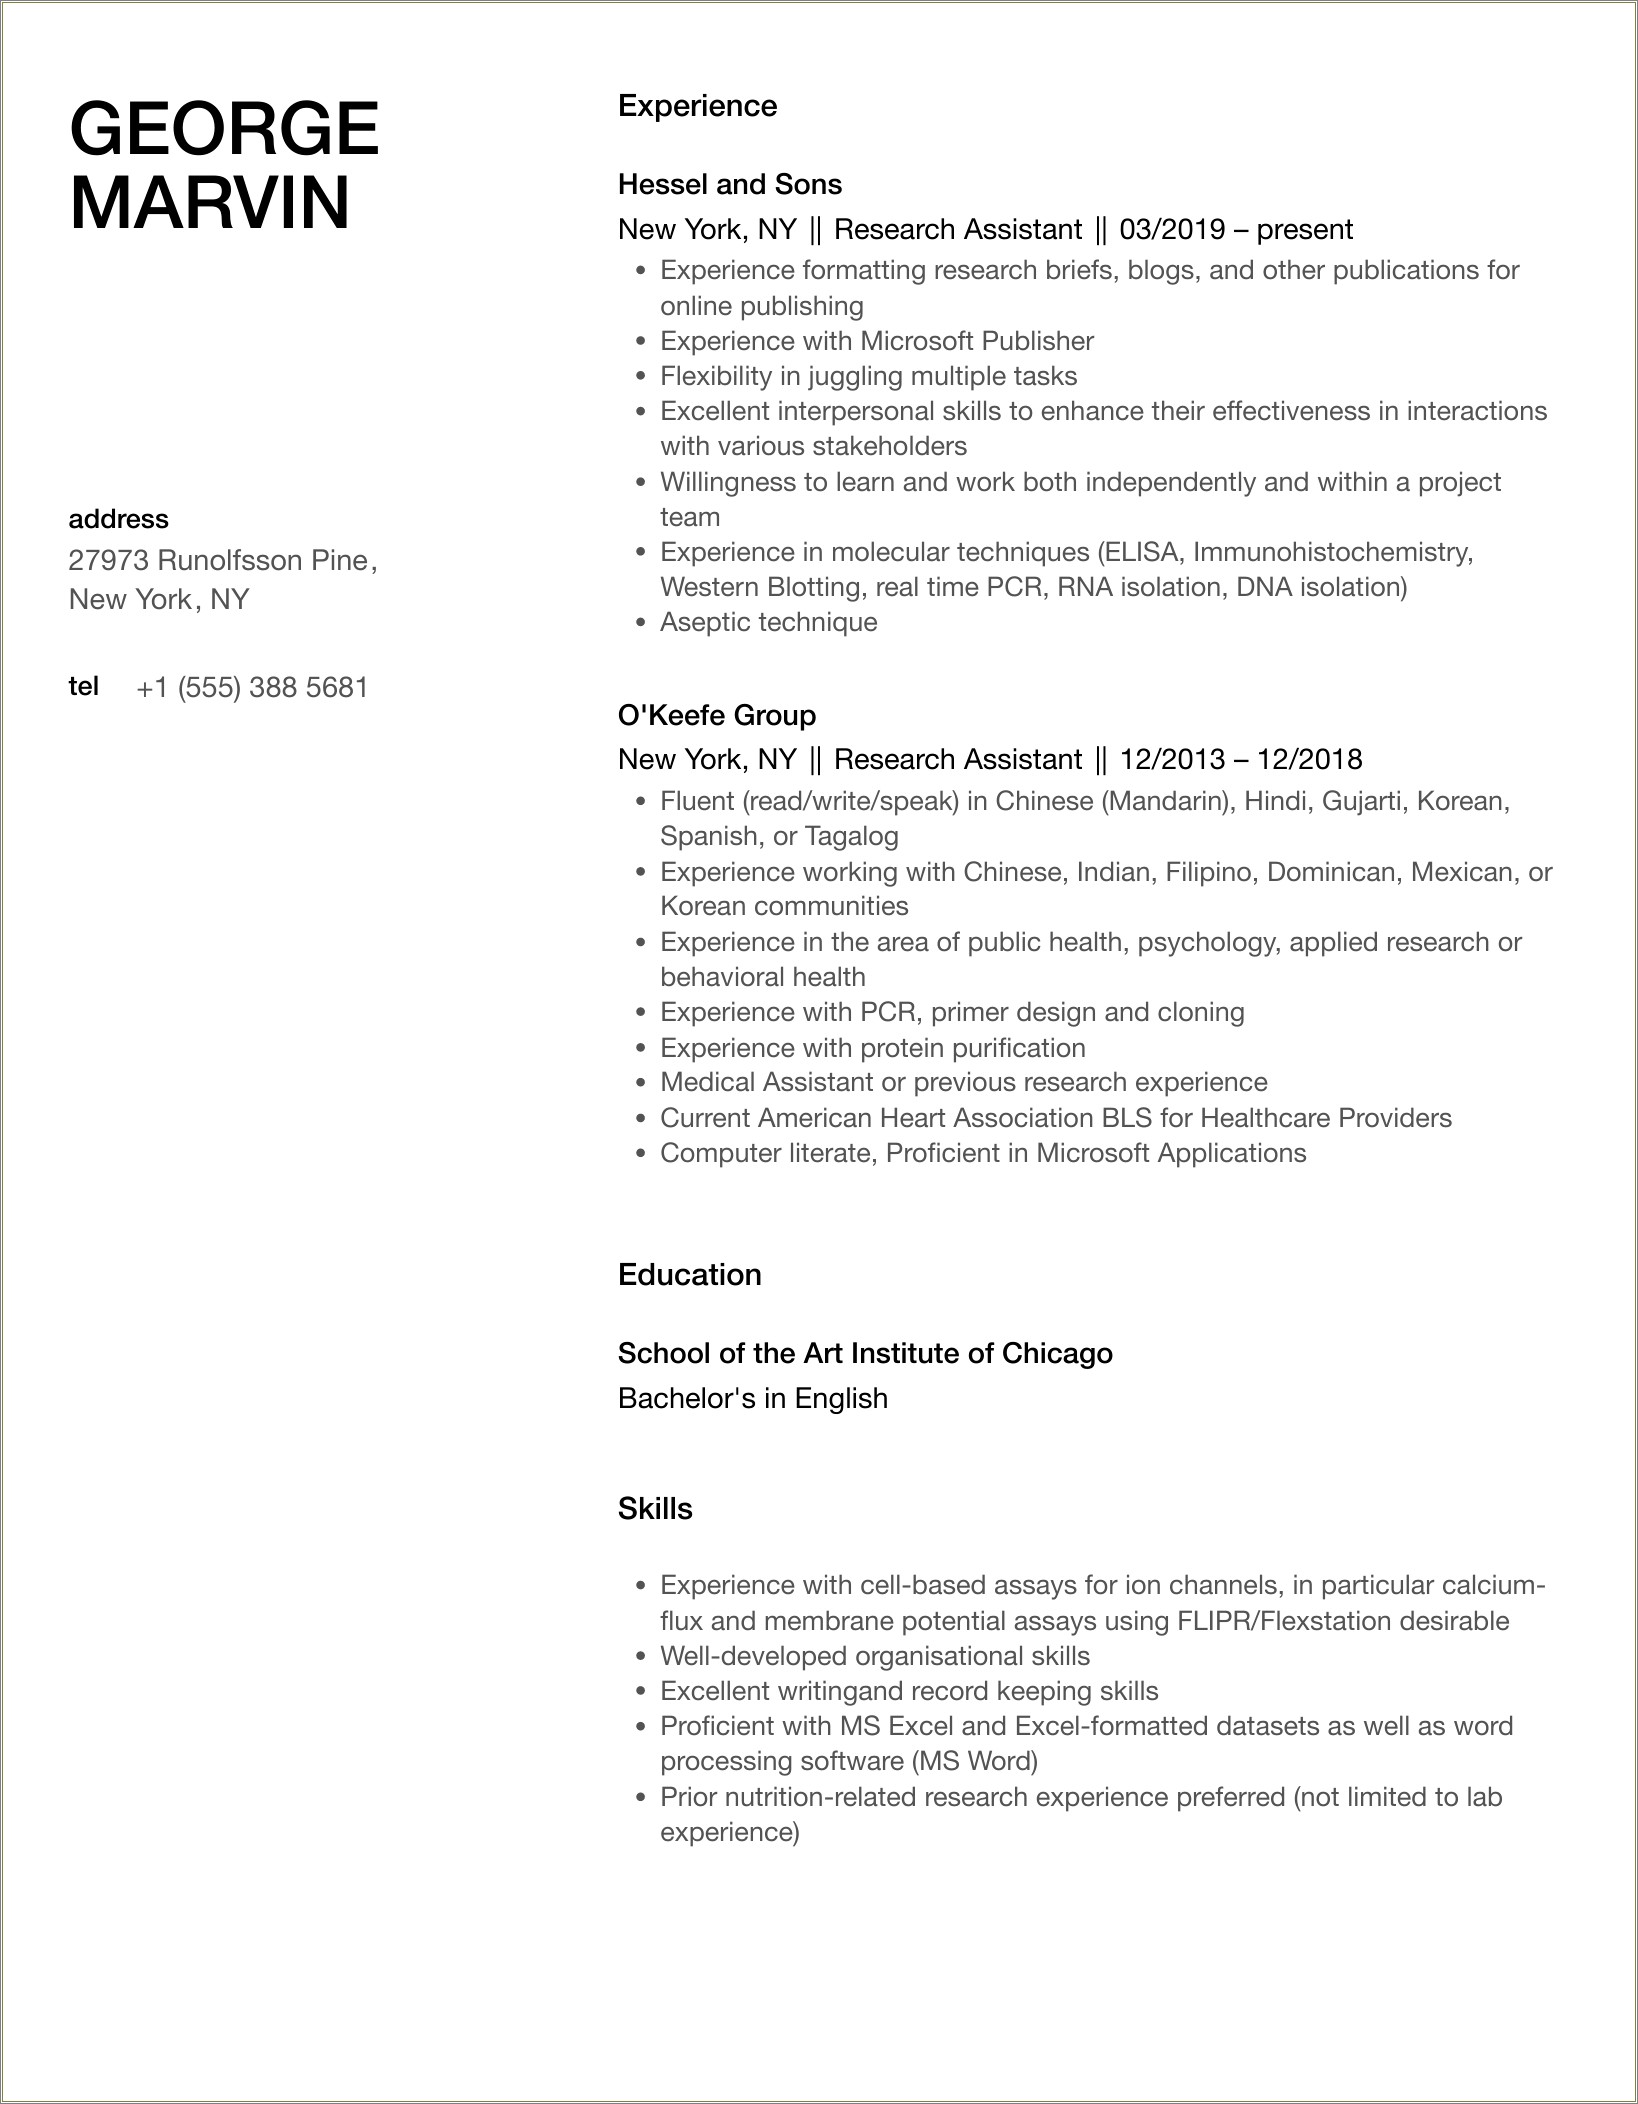 Does Research Assistant Look Good On Resume